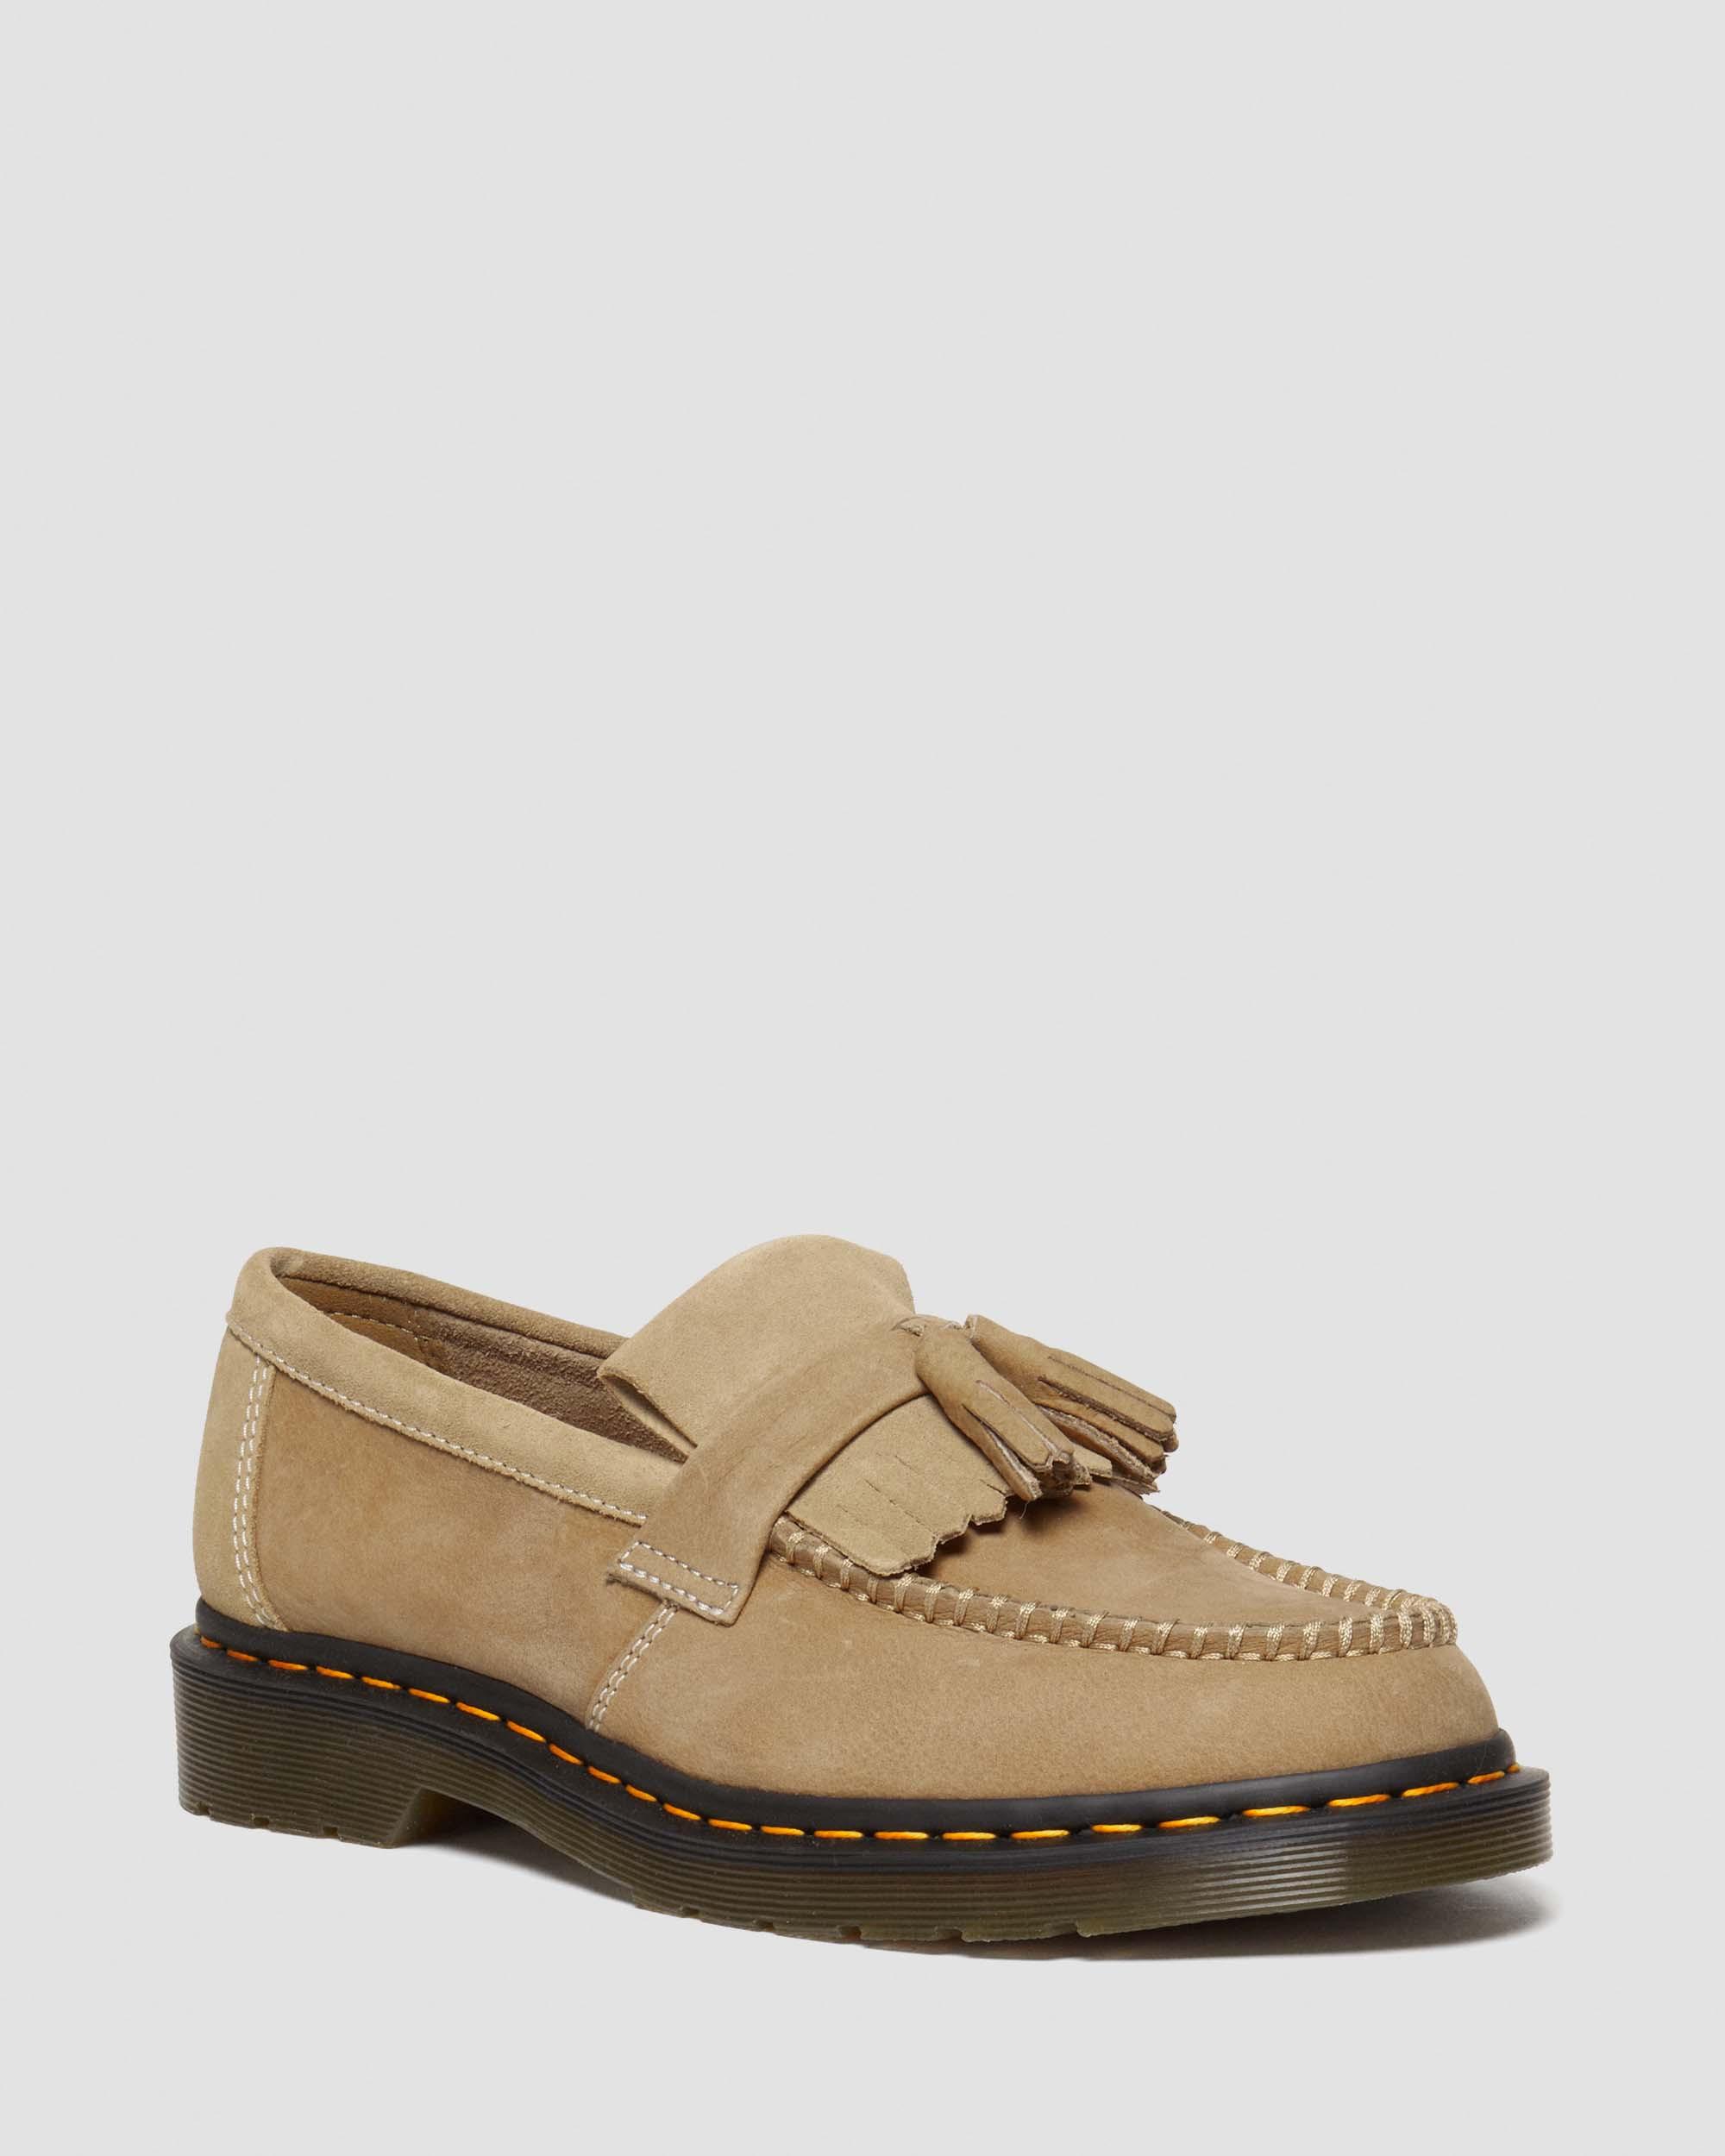 Dr. Martens' Adrian Tumbled Nubuck Leather Tassel Loafers In Tan,brown